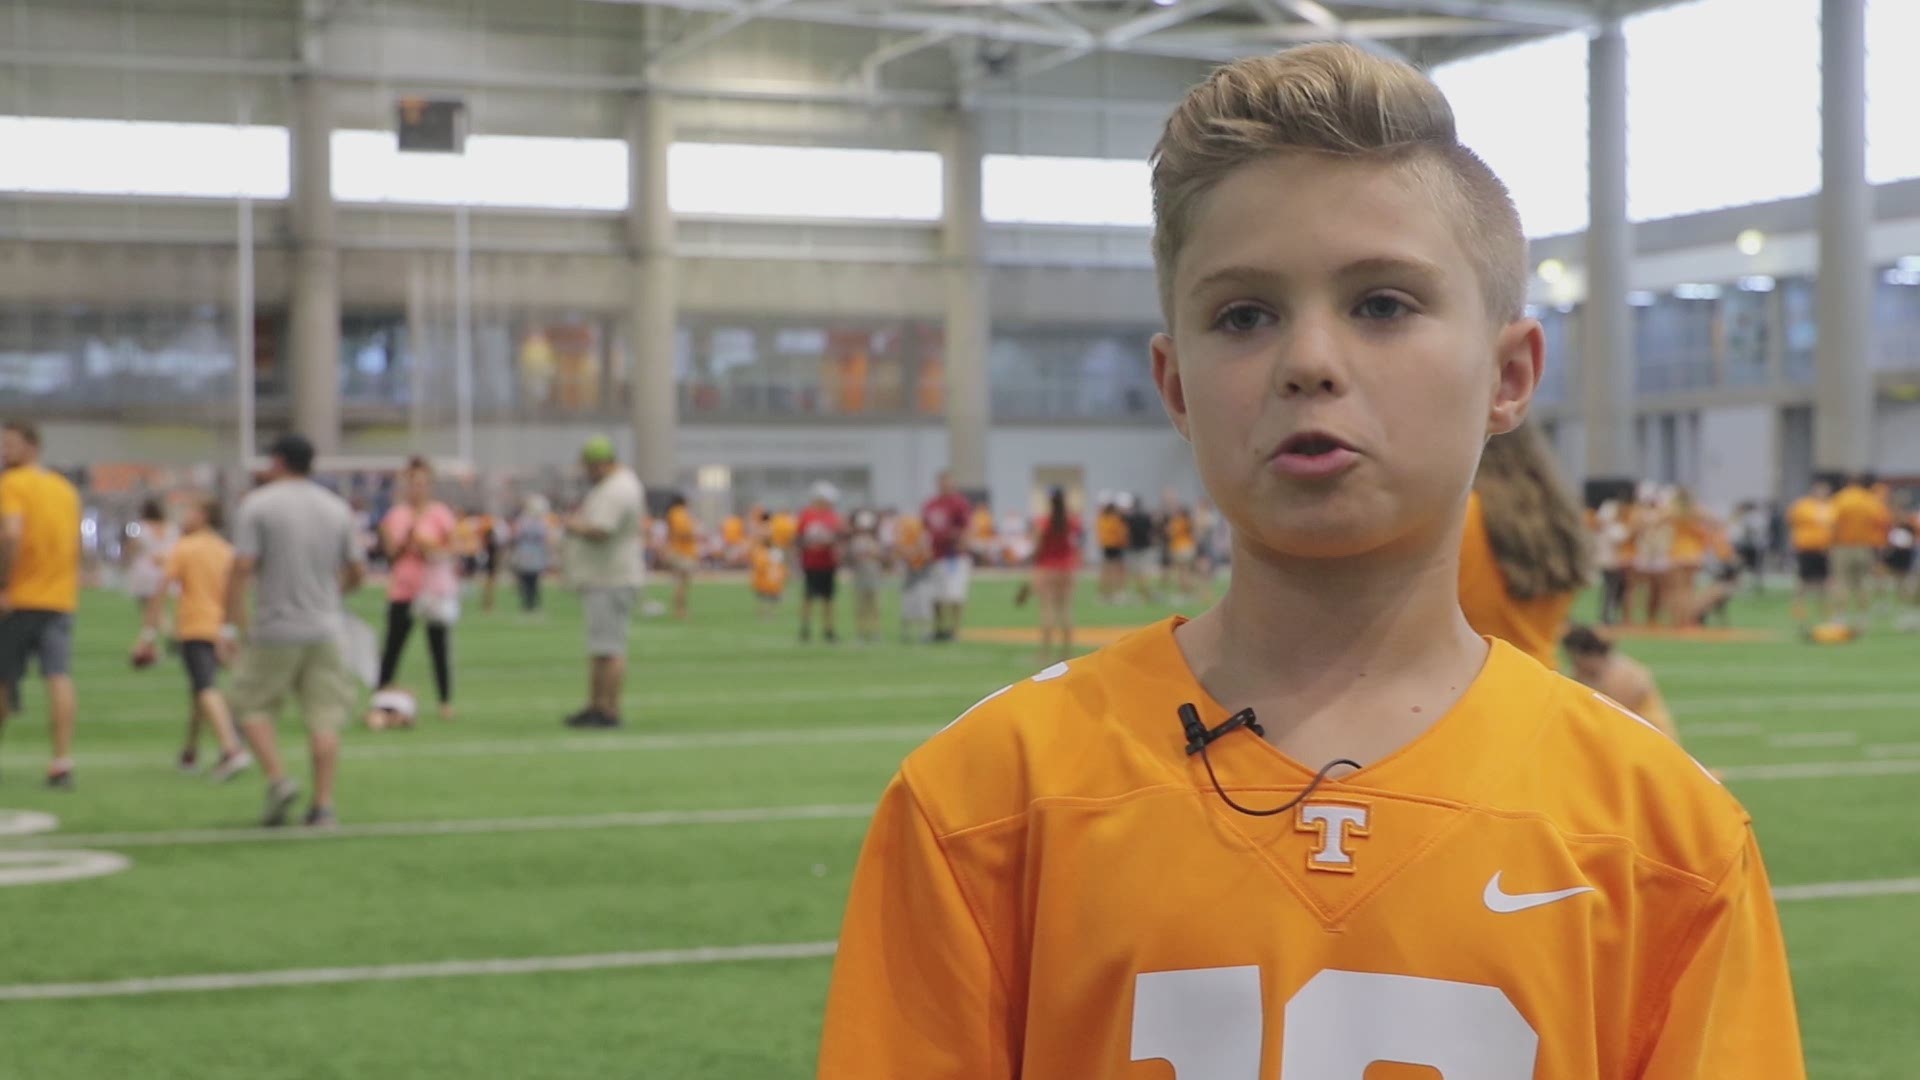 Karson Jameson talks about what his favorite part of being a Vol is.